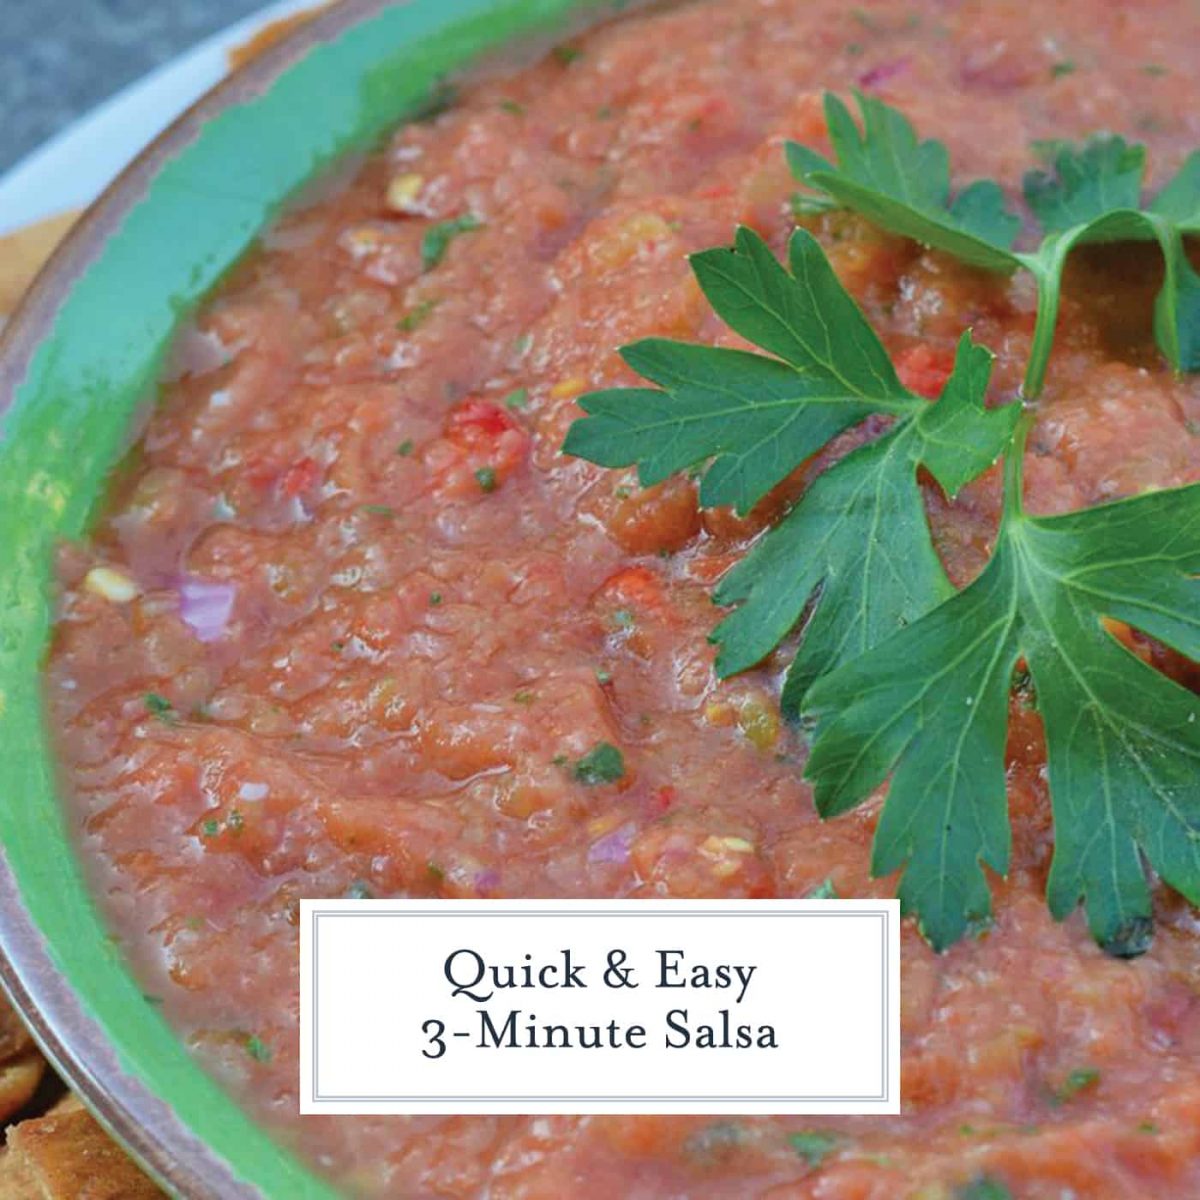 Easy Blender Salsa with Fresh Tomatoes - Butter with a Side of Bread